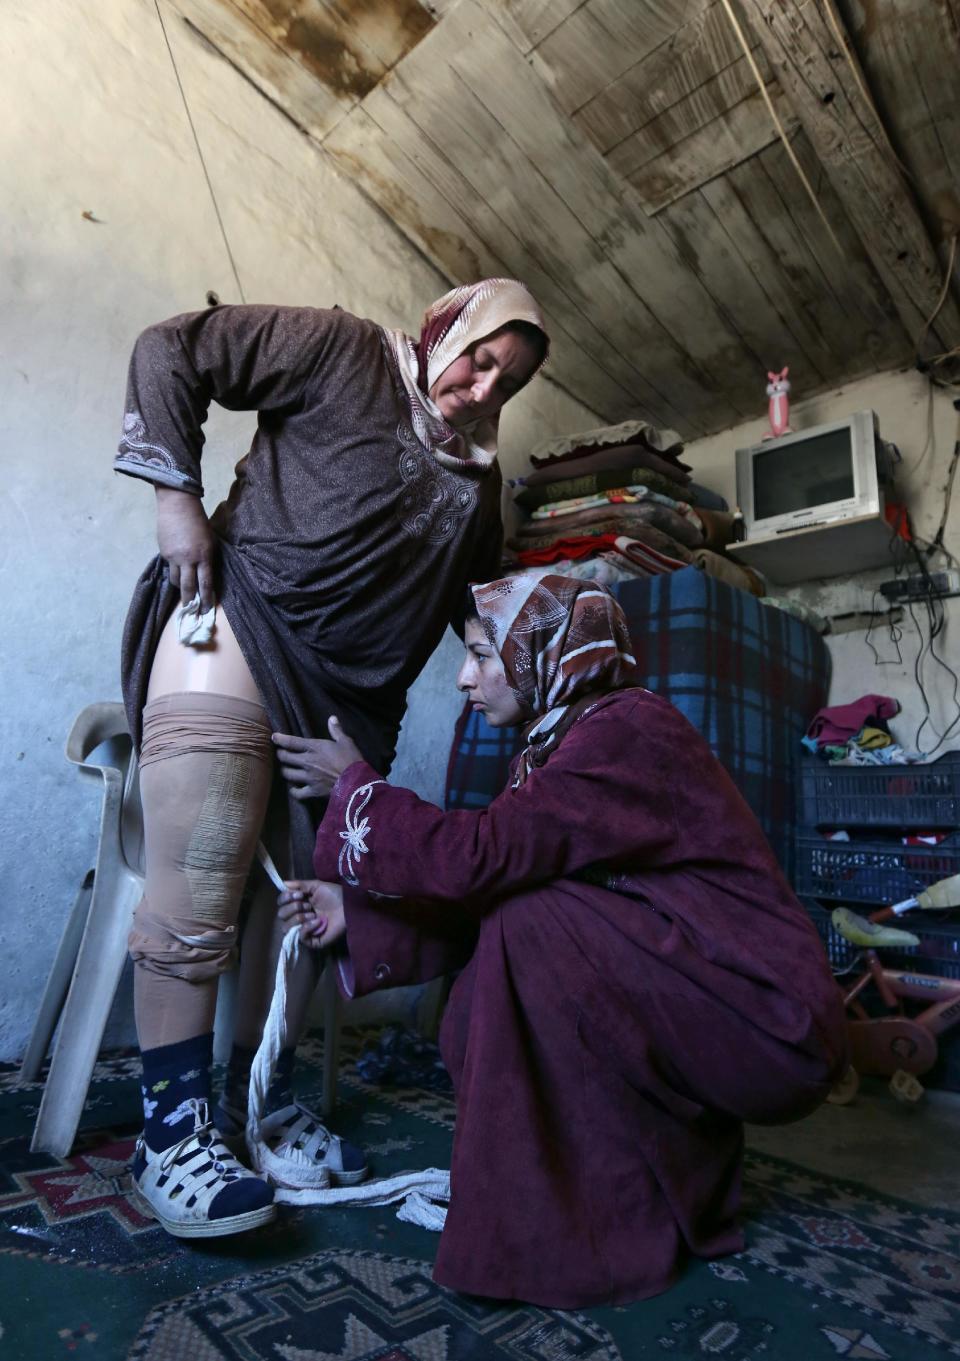 In this Thursday, March 27, 2014 photo, Reem Diab, 34, who lost her leg on Oct. 25, 2012 when a shell slammed into her house in the town of Khan Sheikoun in central Syria, takes off her artificial leg with the help of her relative, right, in Chtaoura, in the Bekaa valley, Lebanon. The shelling killed her husband, Mustafa, and her 15-year-old daughter, Batoul. Syria’s civil war, which entered its fourth year last month, has killed more than 150,000 people. An often overlooked figure is the number of wounded more than 500,000, according to the International Committee of the Red Cross. An untold number of those, there’s no reliable estimate even, have suffered traumatic injuries that have left them physically handicapped. (AP Photo/Bilal Hussein)